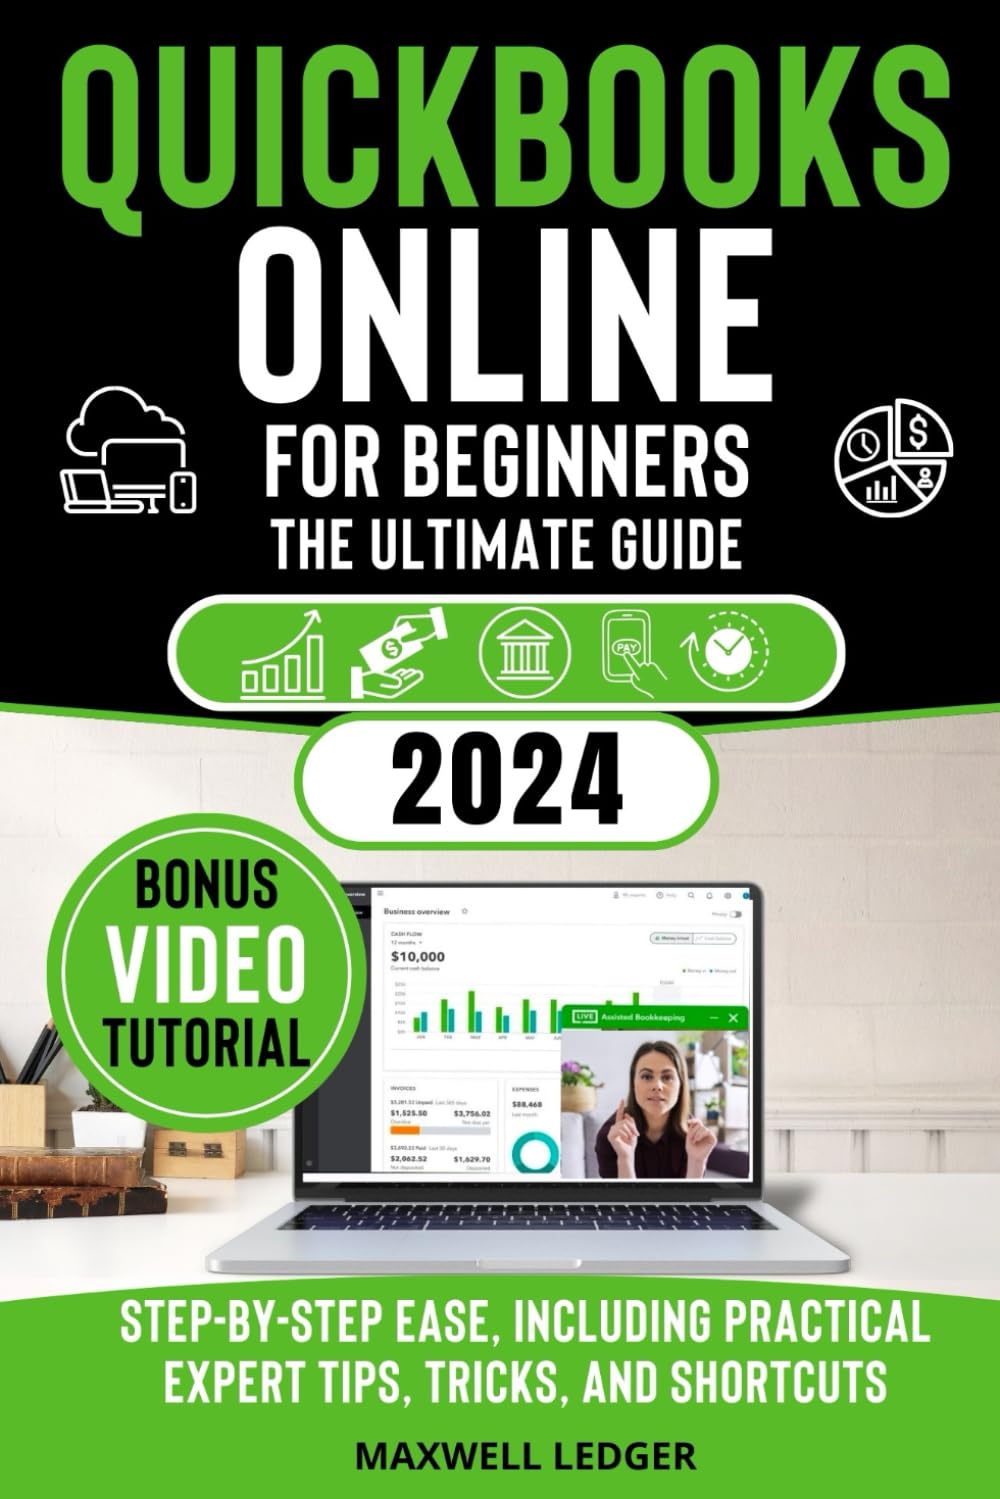 QuickBooks Online for Beginners: The Ultimate Guide: Master Your Finances and Bookkeeping with Step-by-Step Ease, Including Practical Expert Tips, Tricks, and Shortcuts